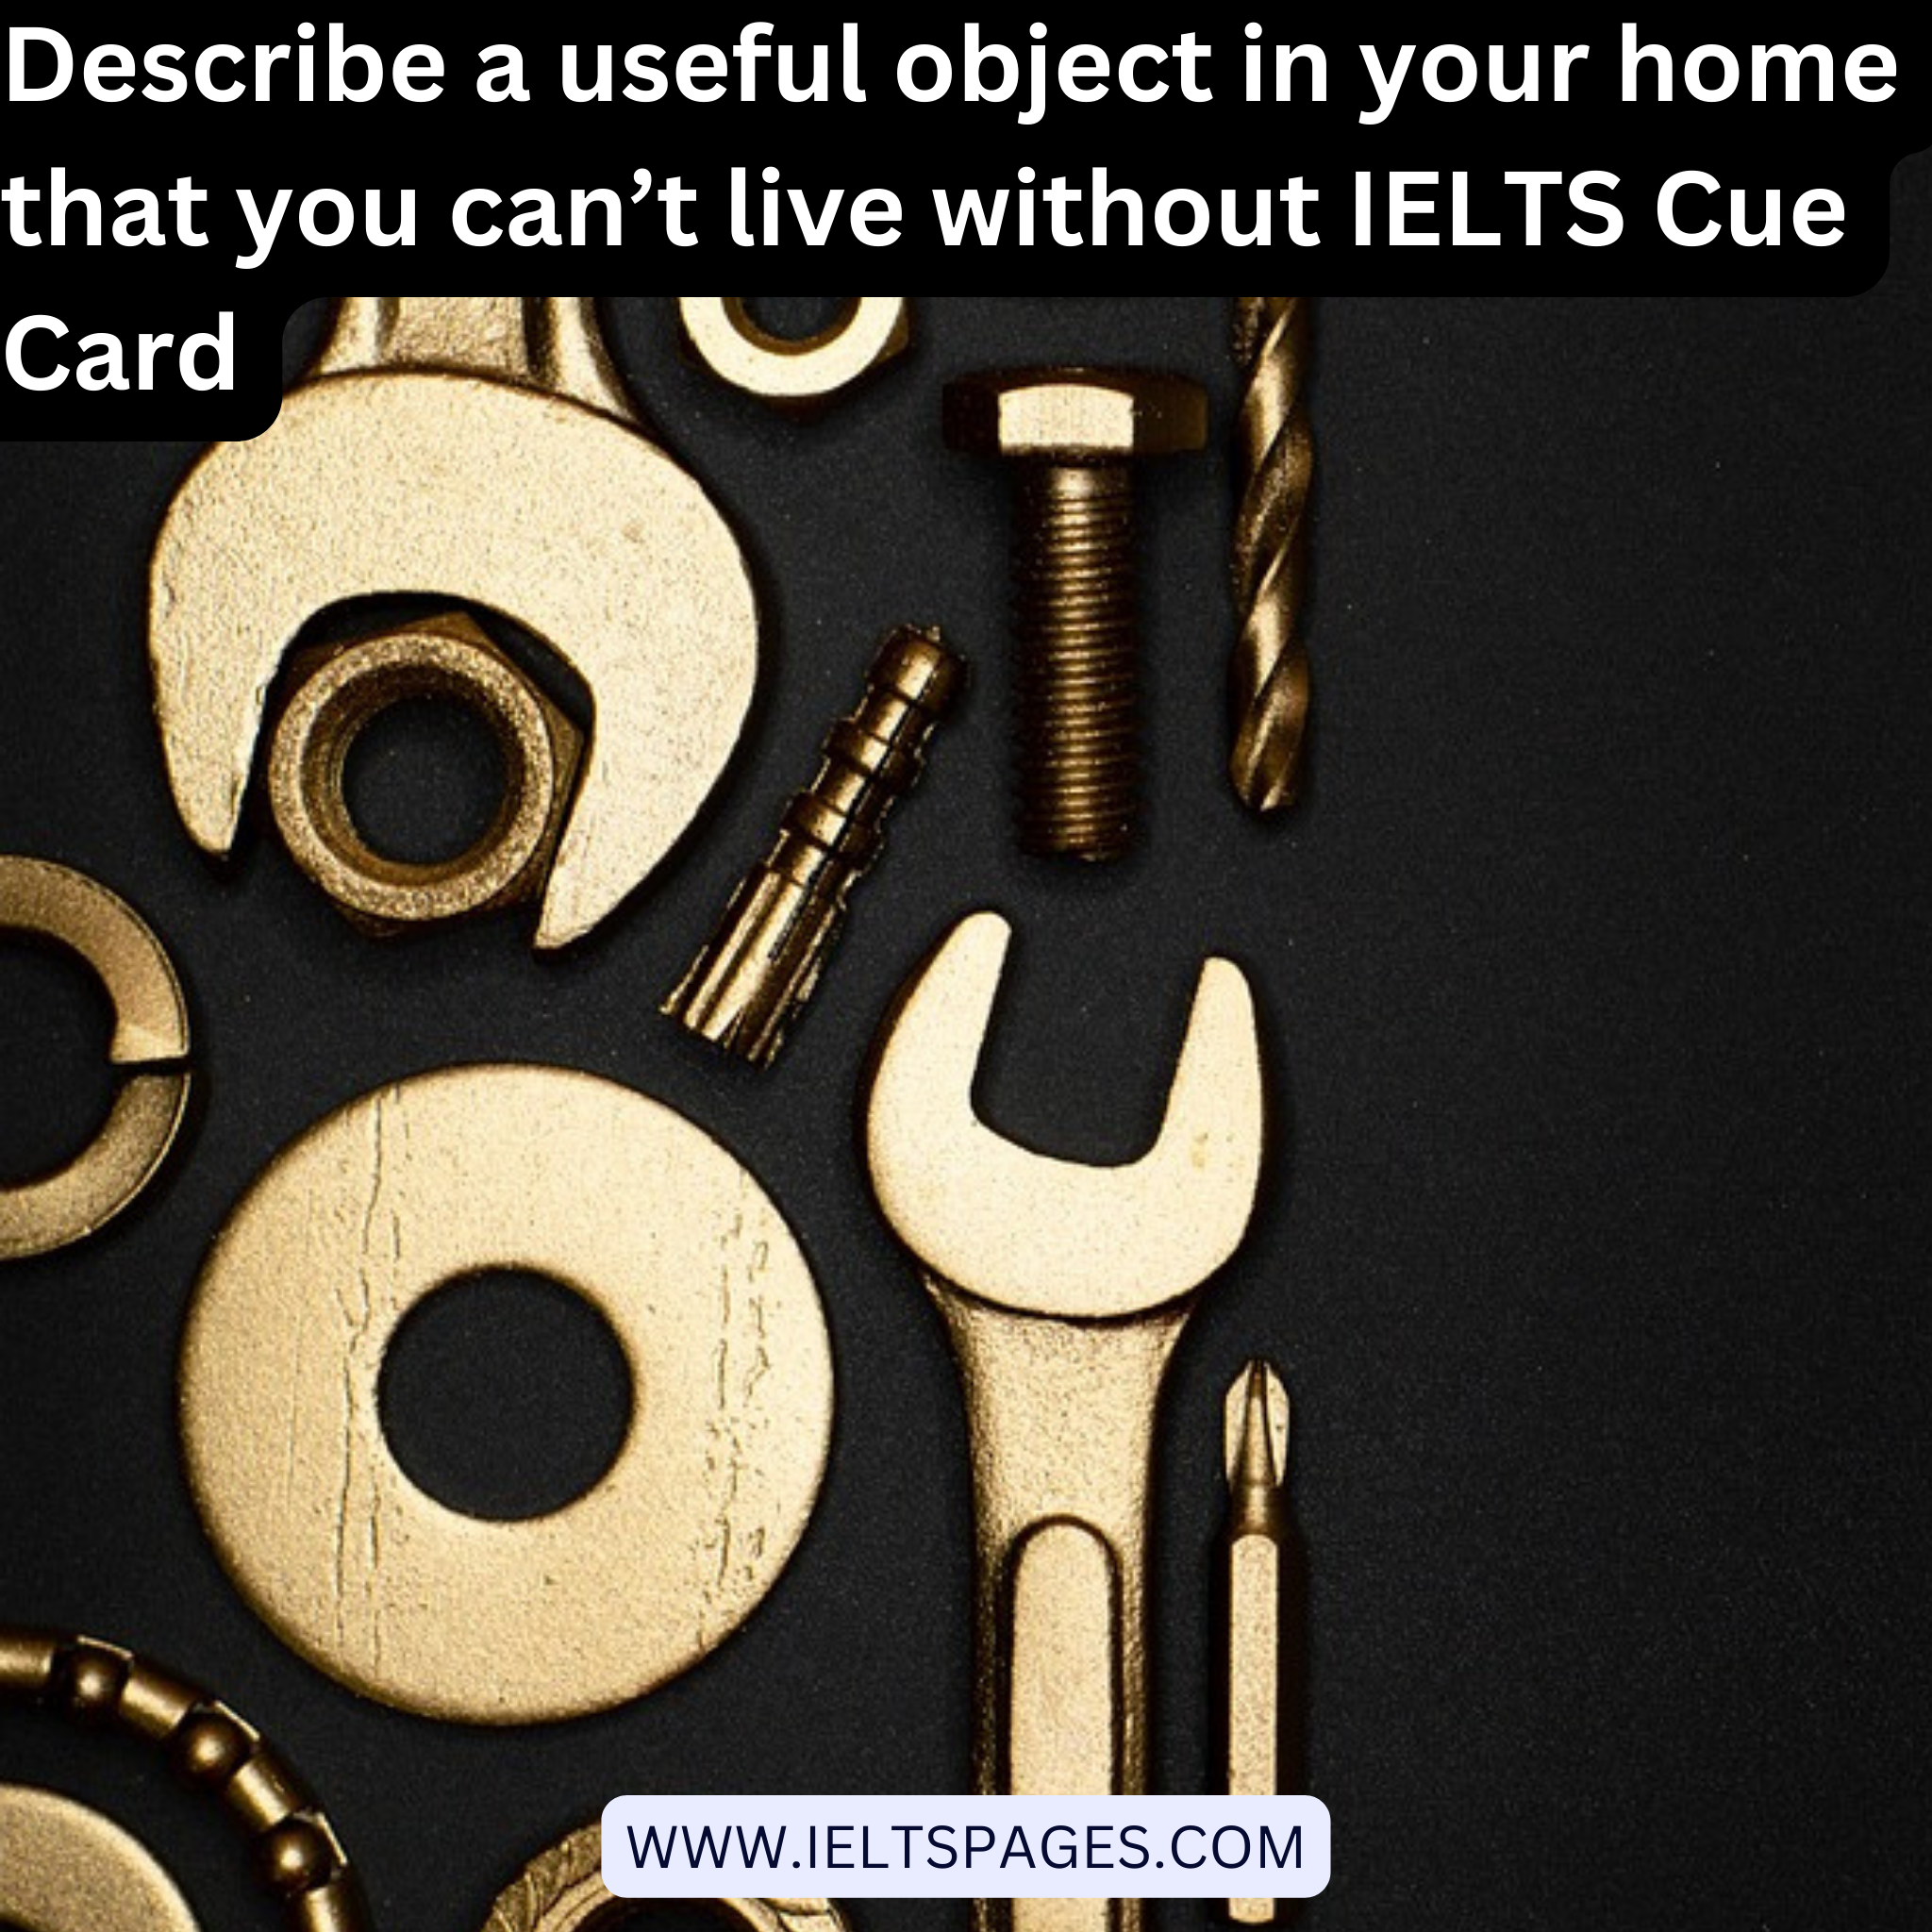 Describe a useful object in your home that you can’t live without IELTS Cue Card